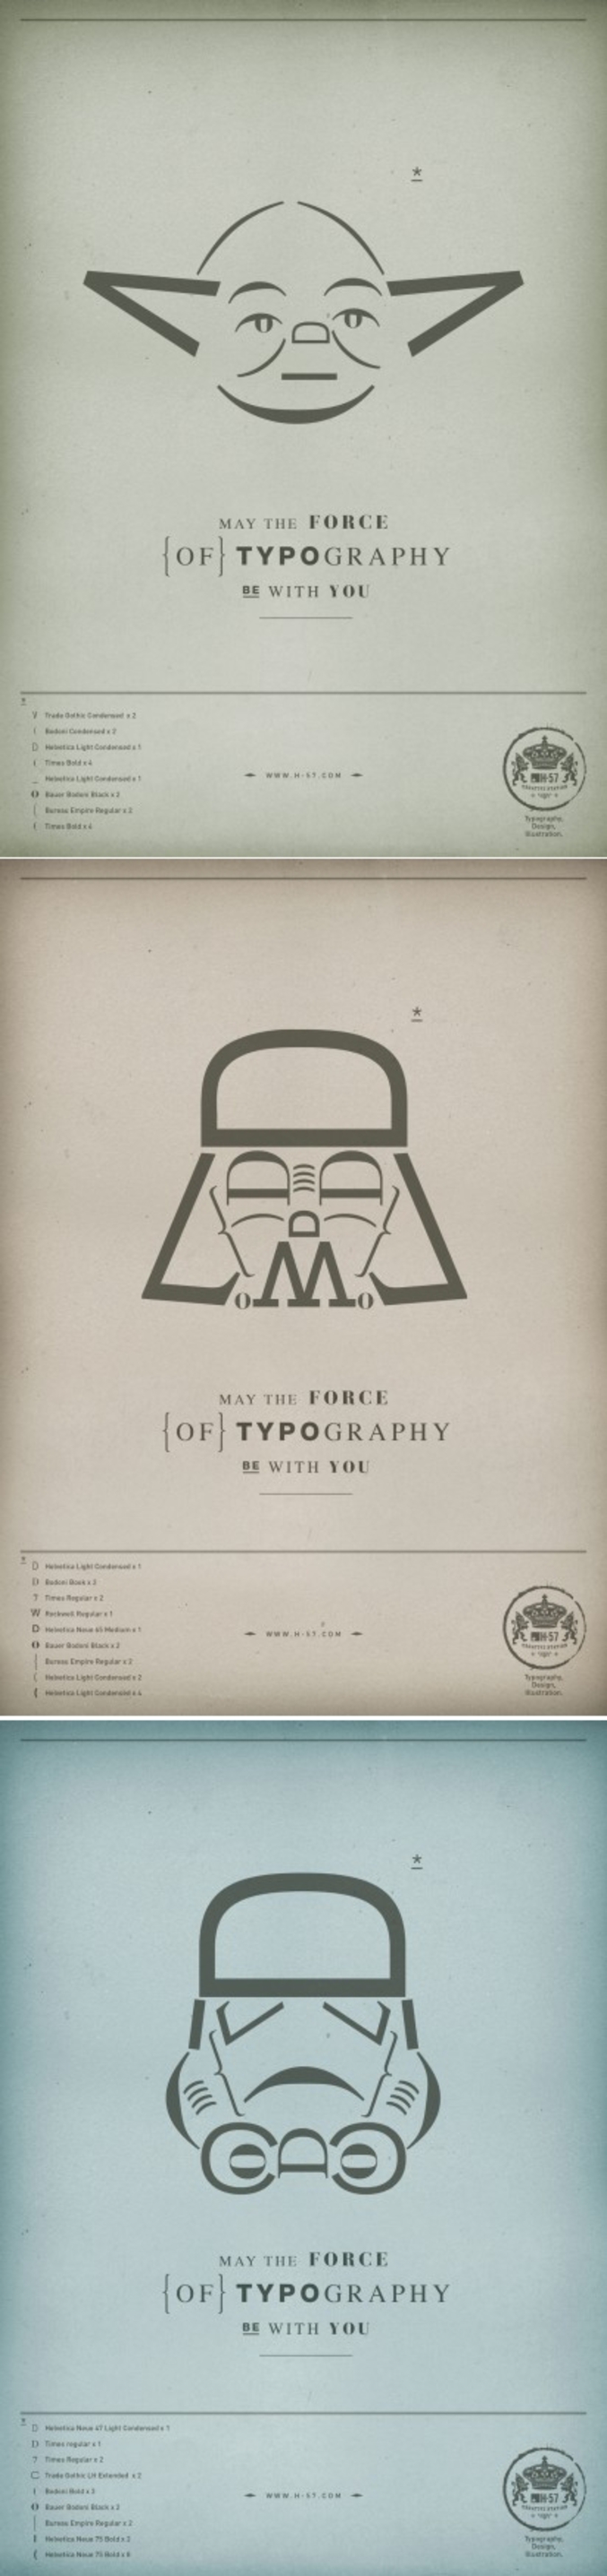 May the force of typography be with you.